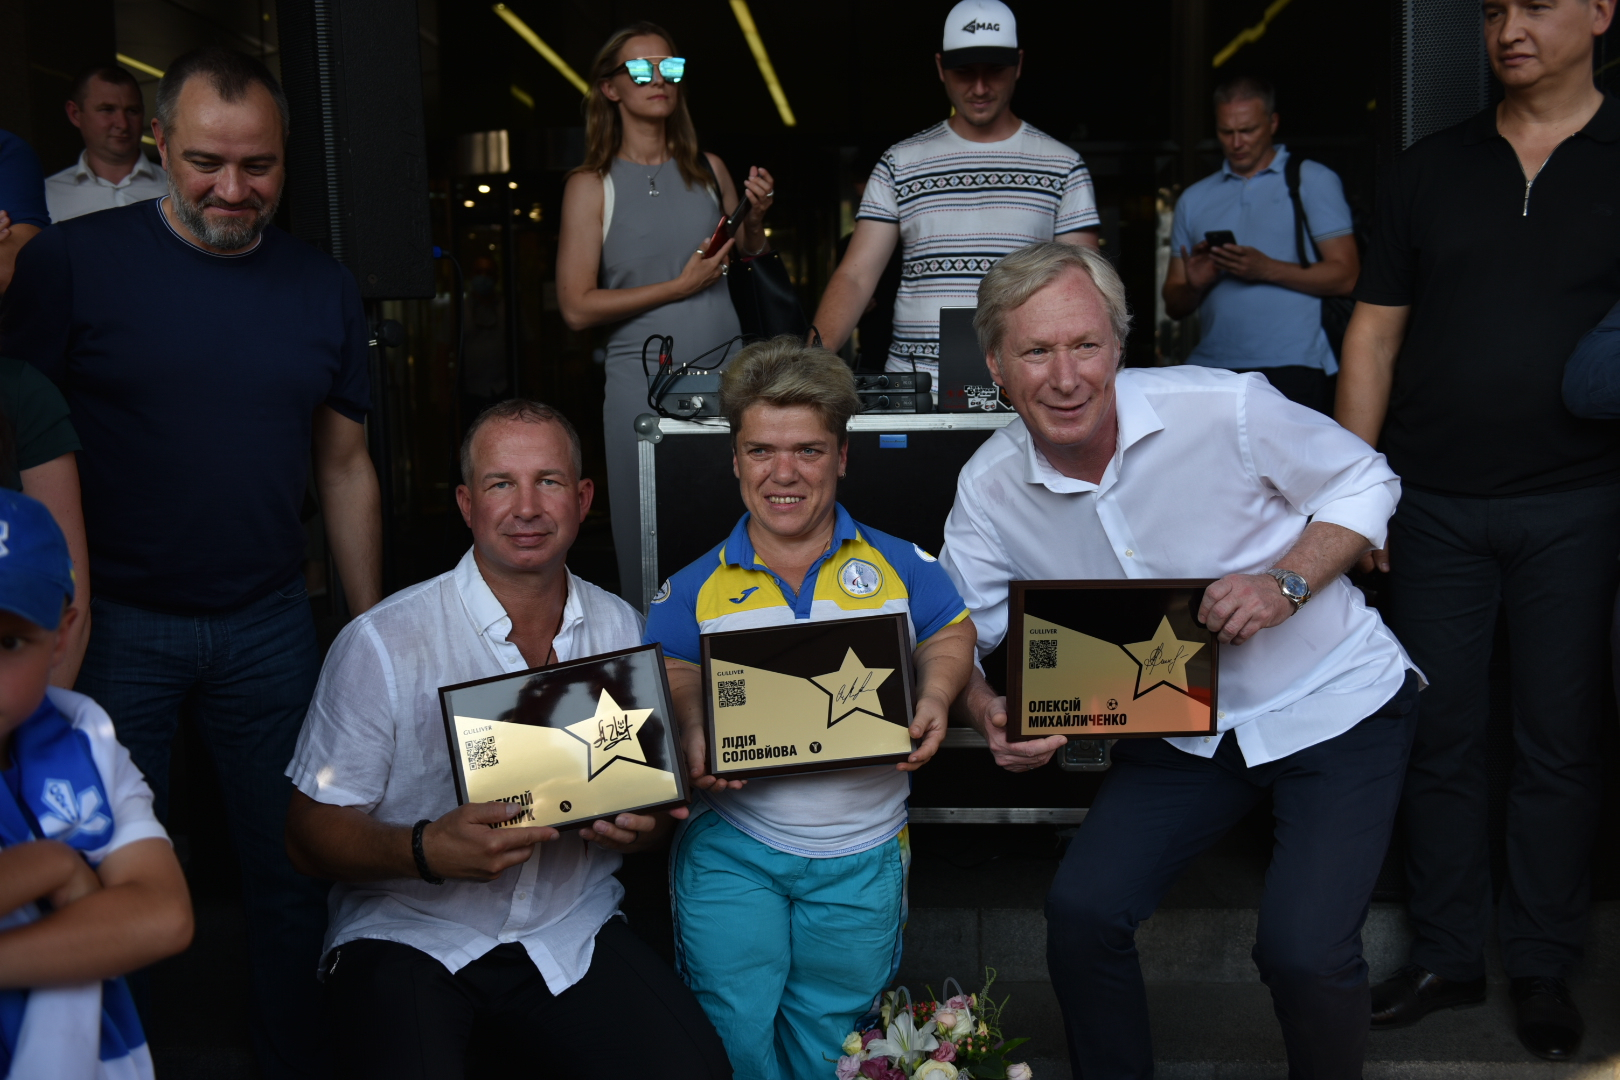 Three outstanding athletes received their stars at Star Square image-1